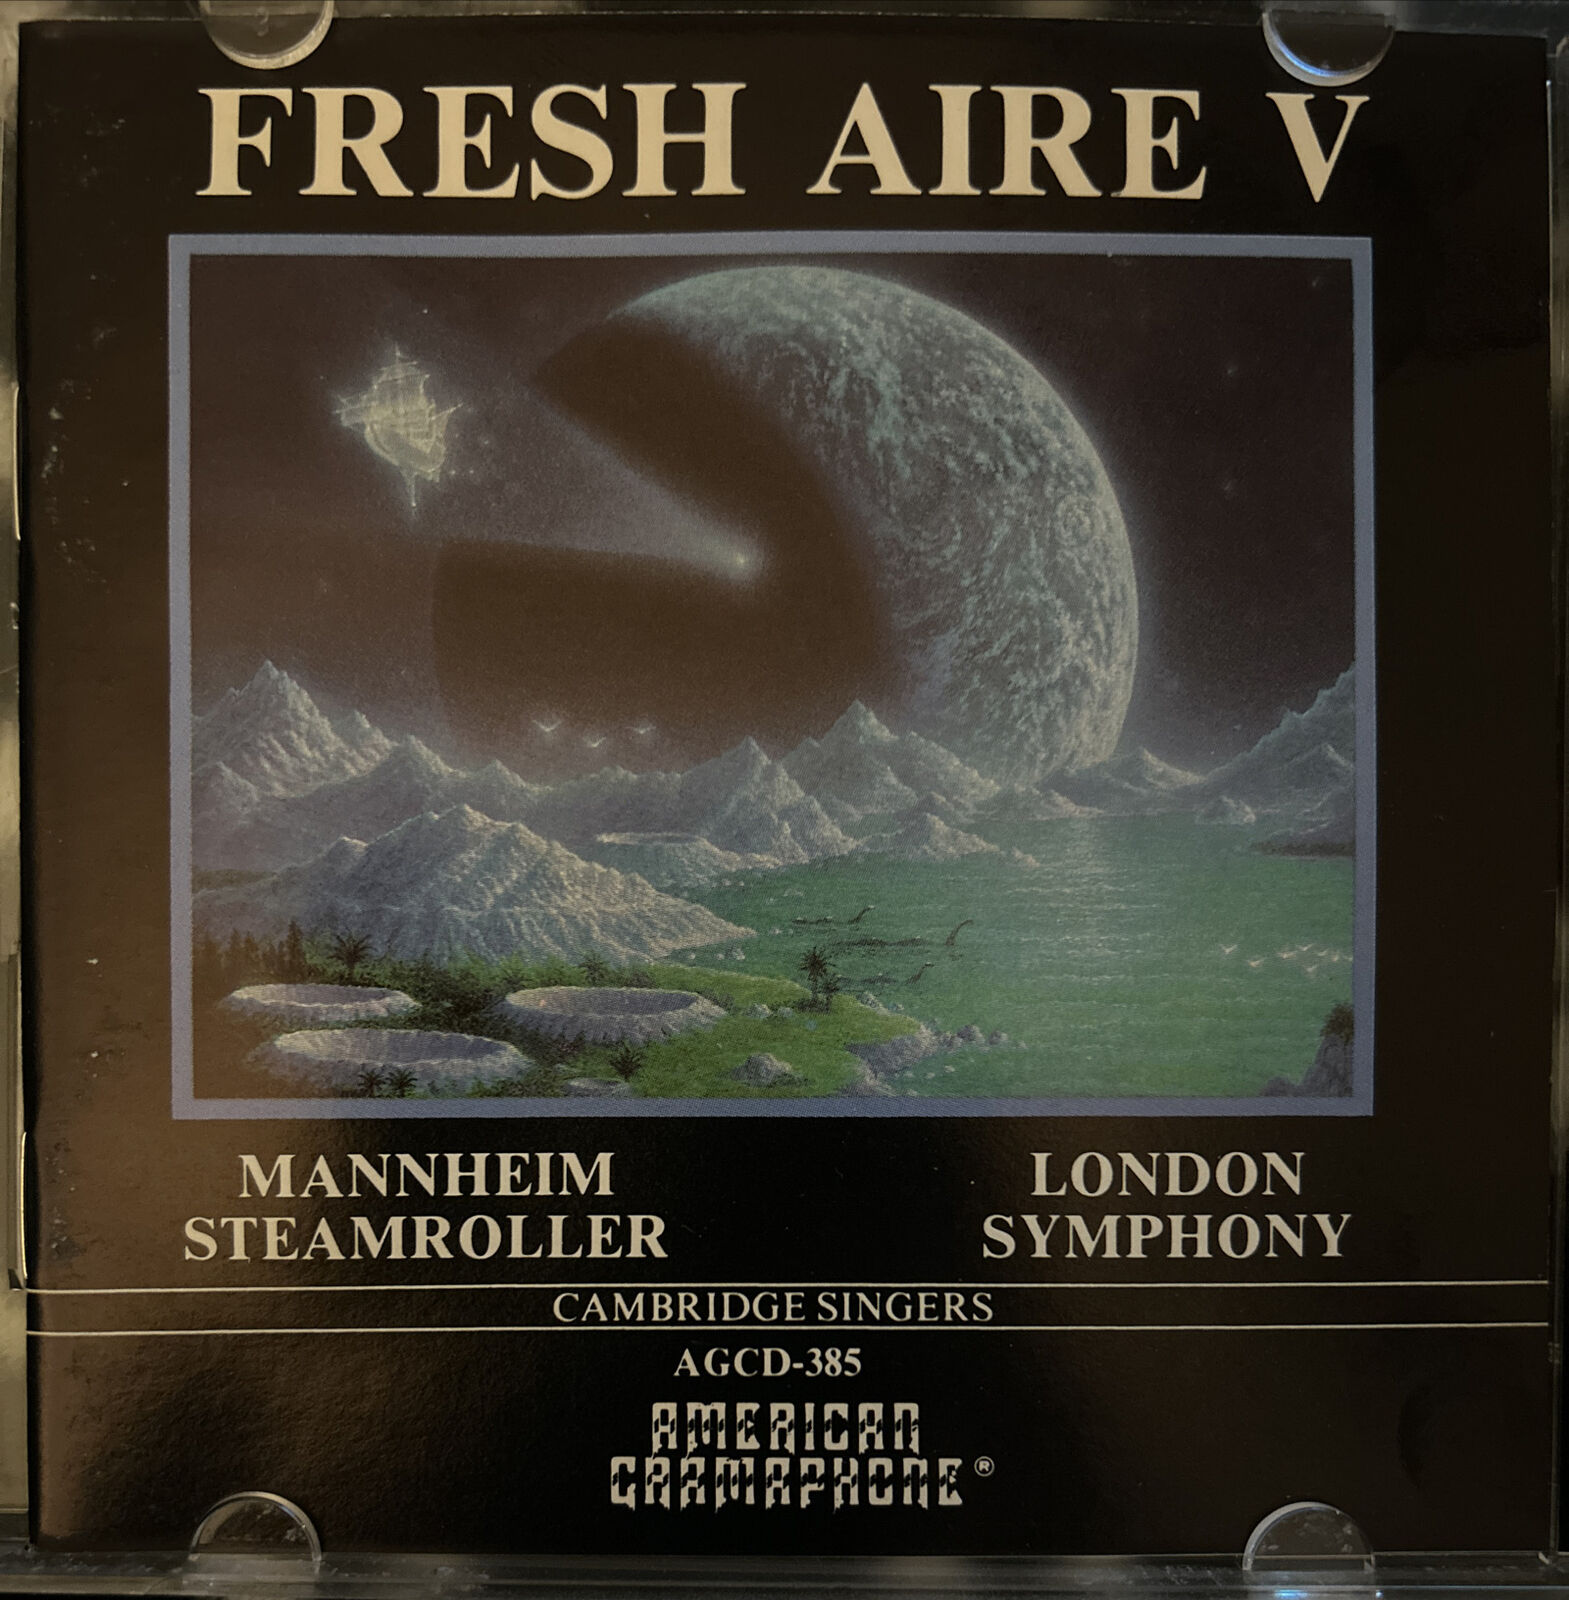 Fresh Aire V by Mannheim Steamroller (CD, Oct-1990, American Gramaphone Records)